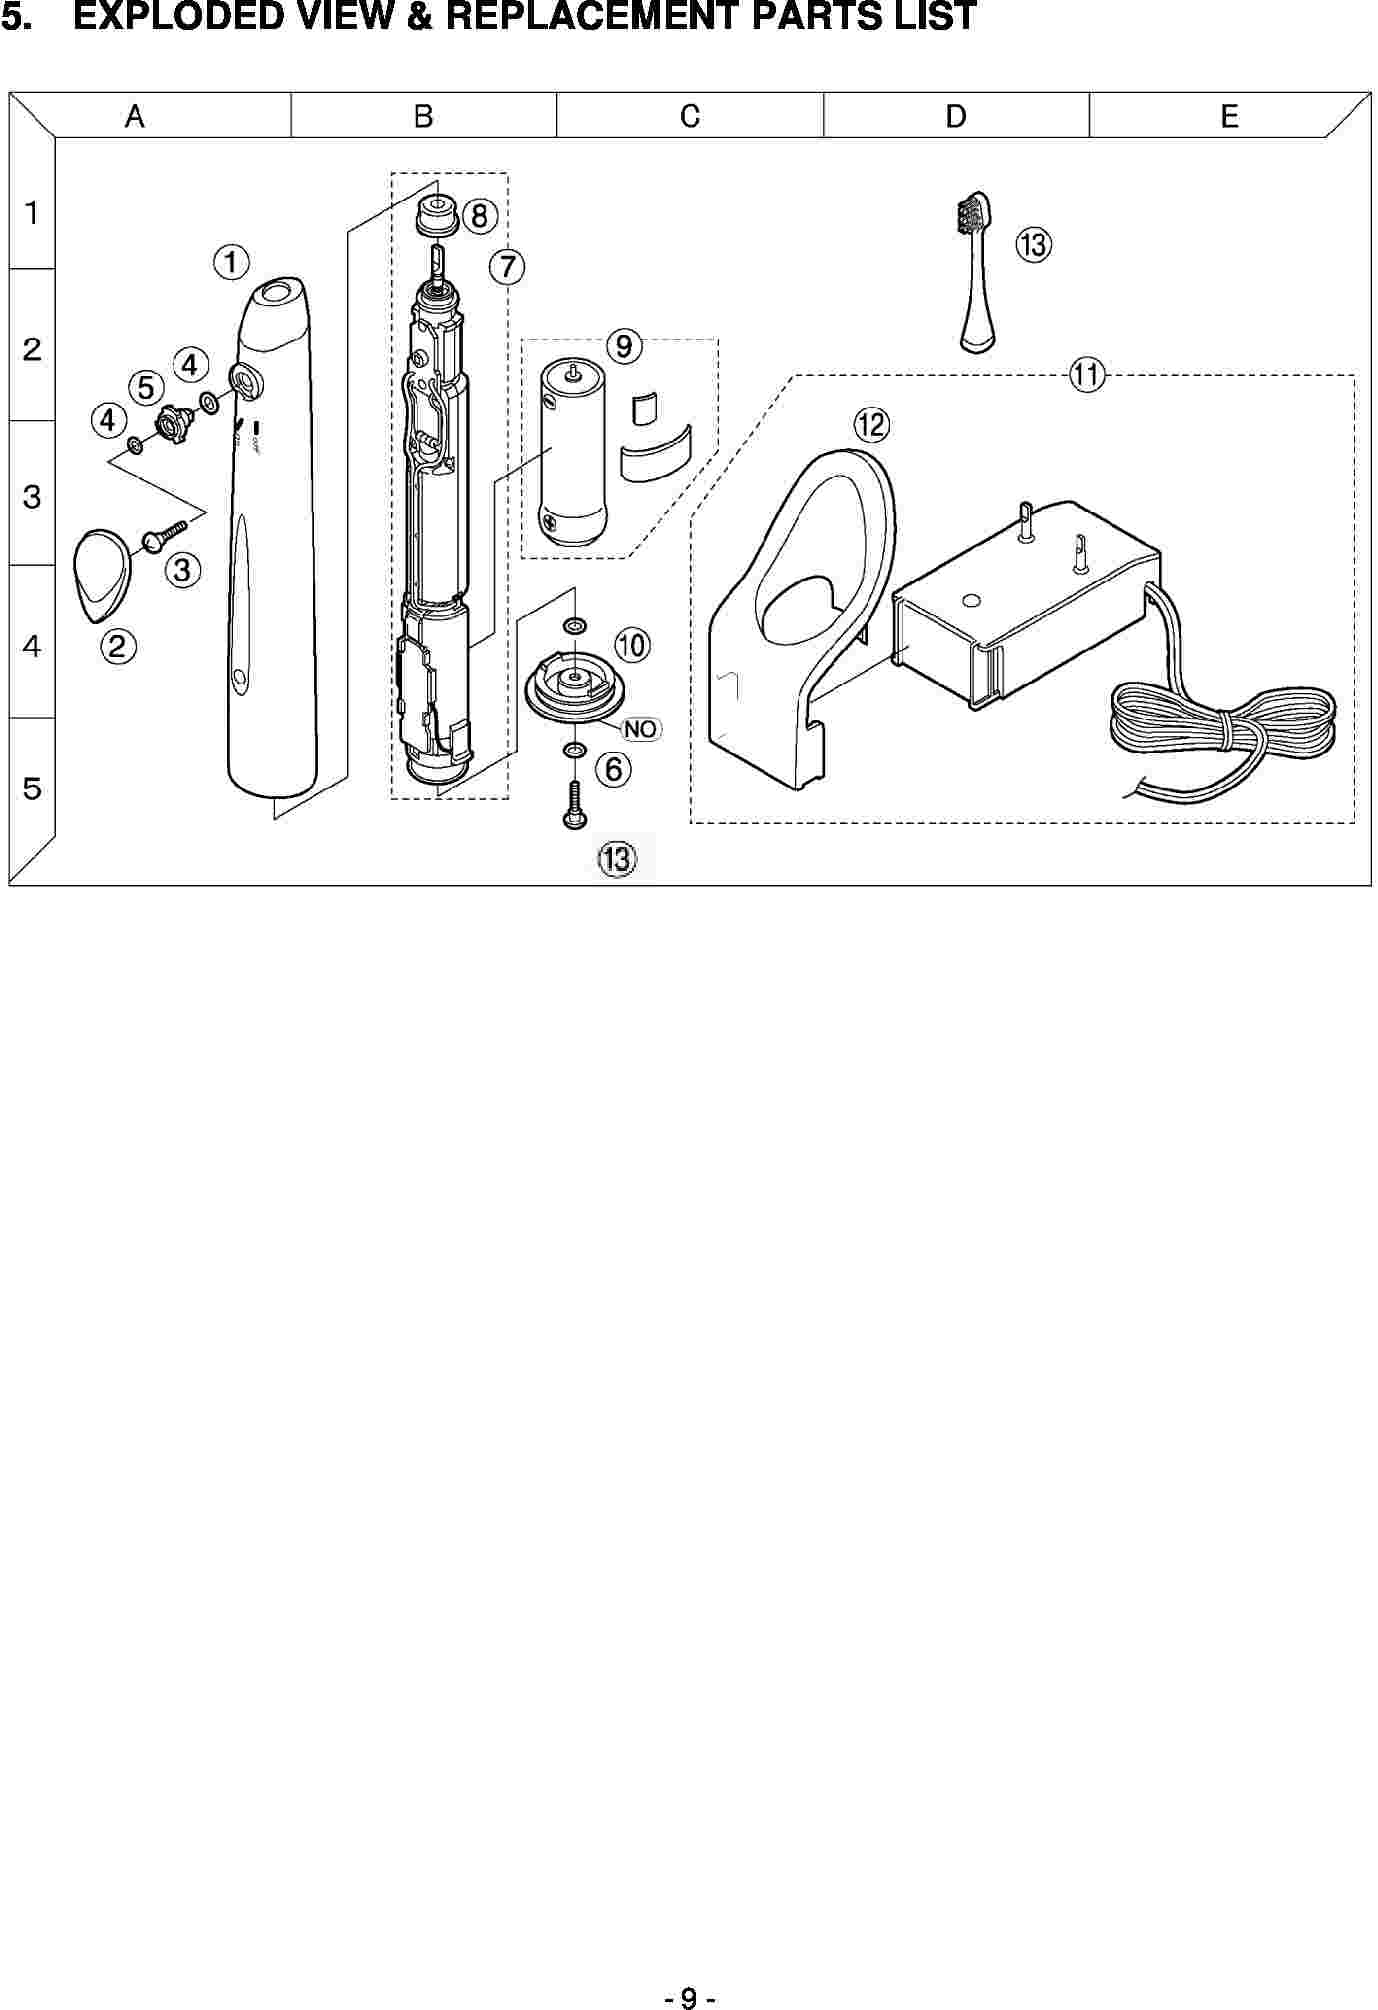 EW1031: Exploded View